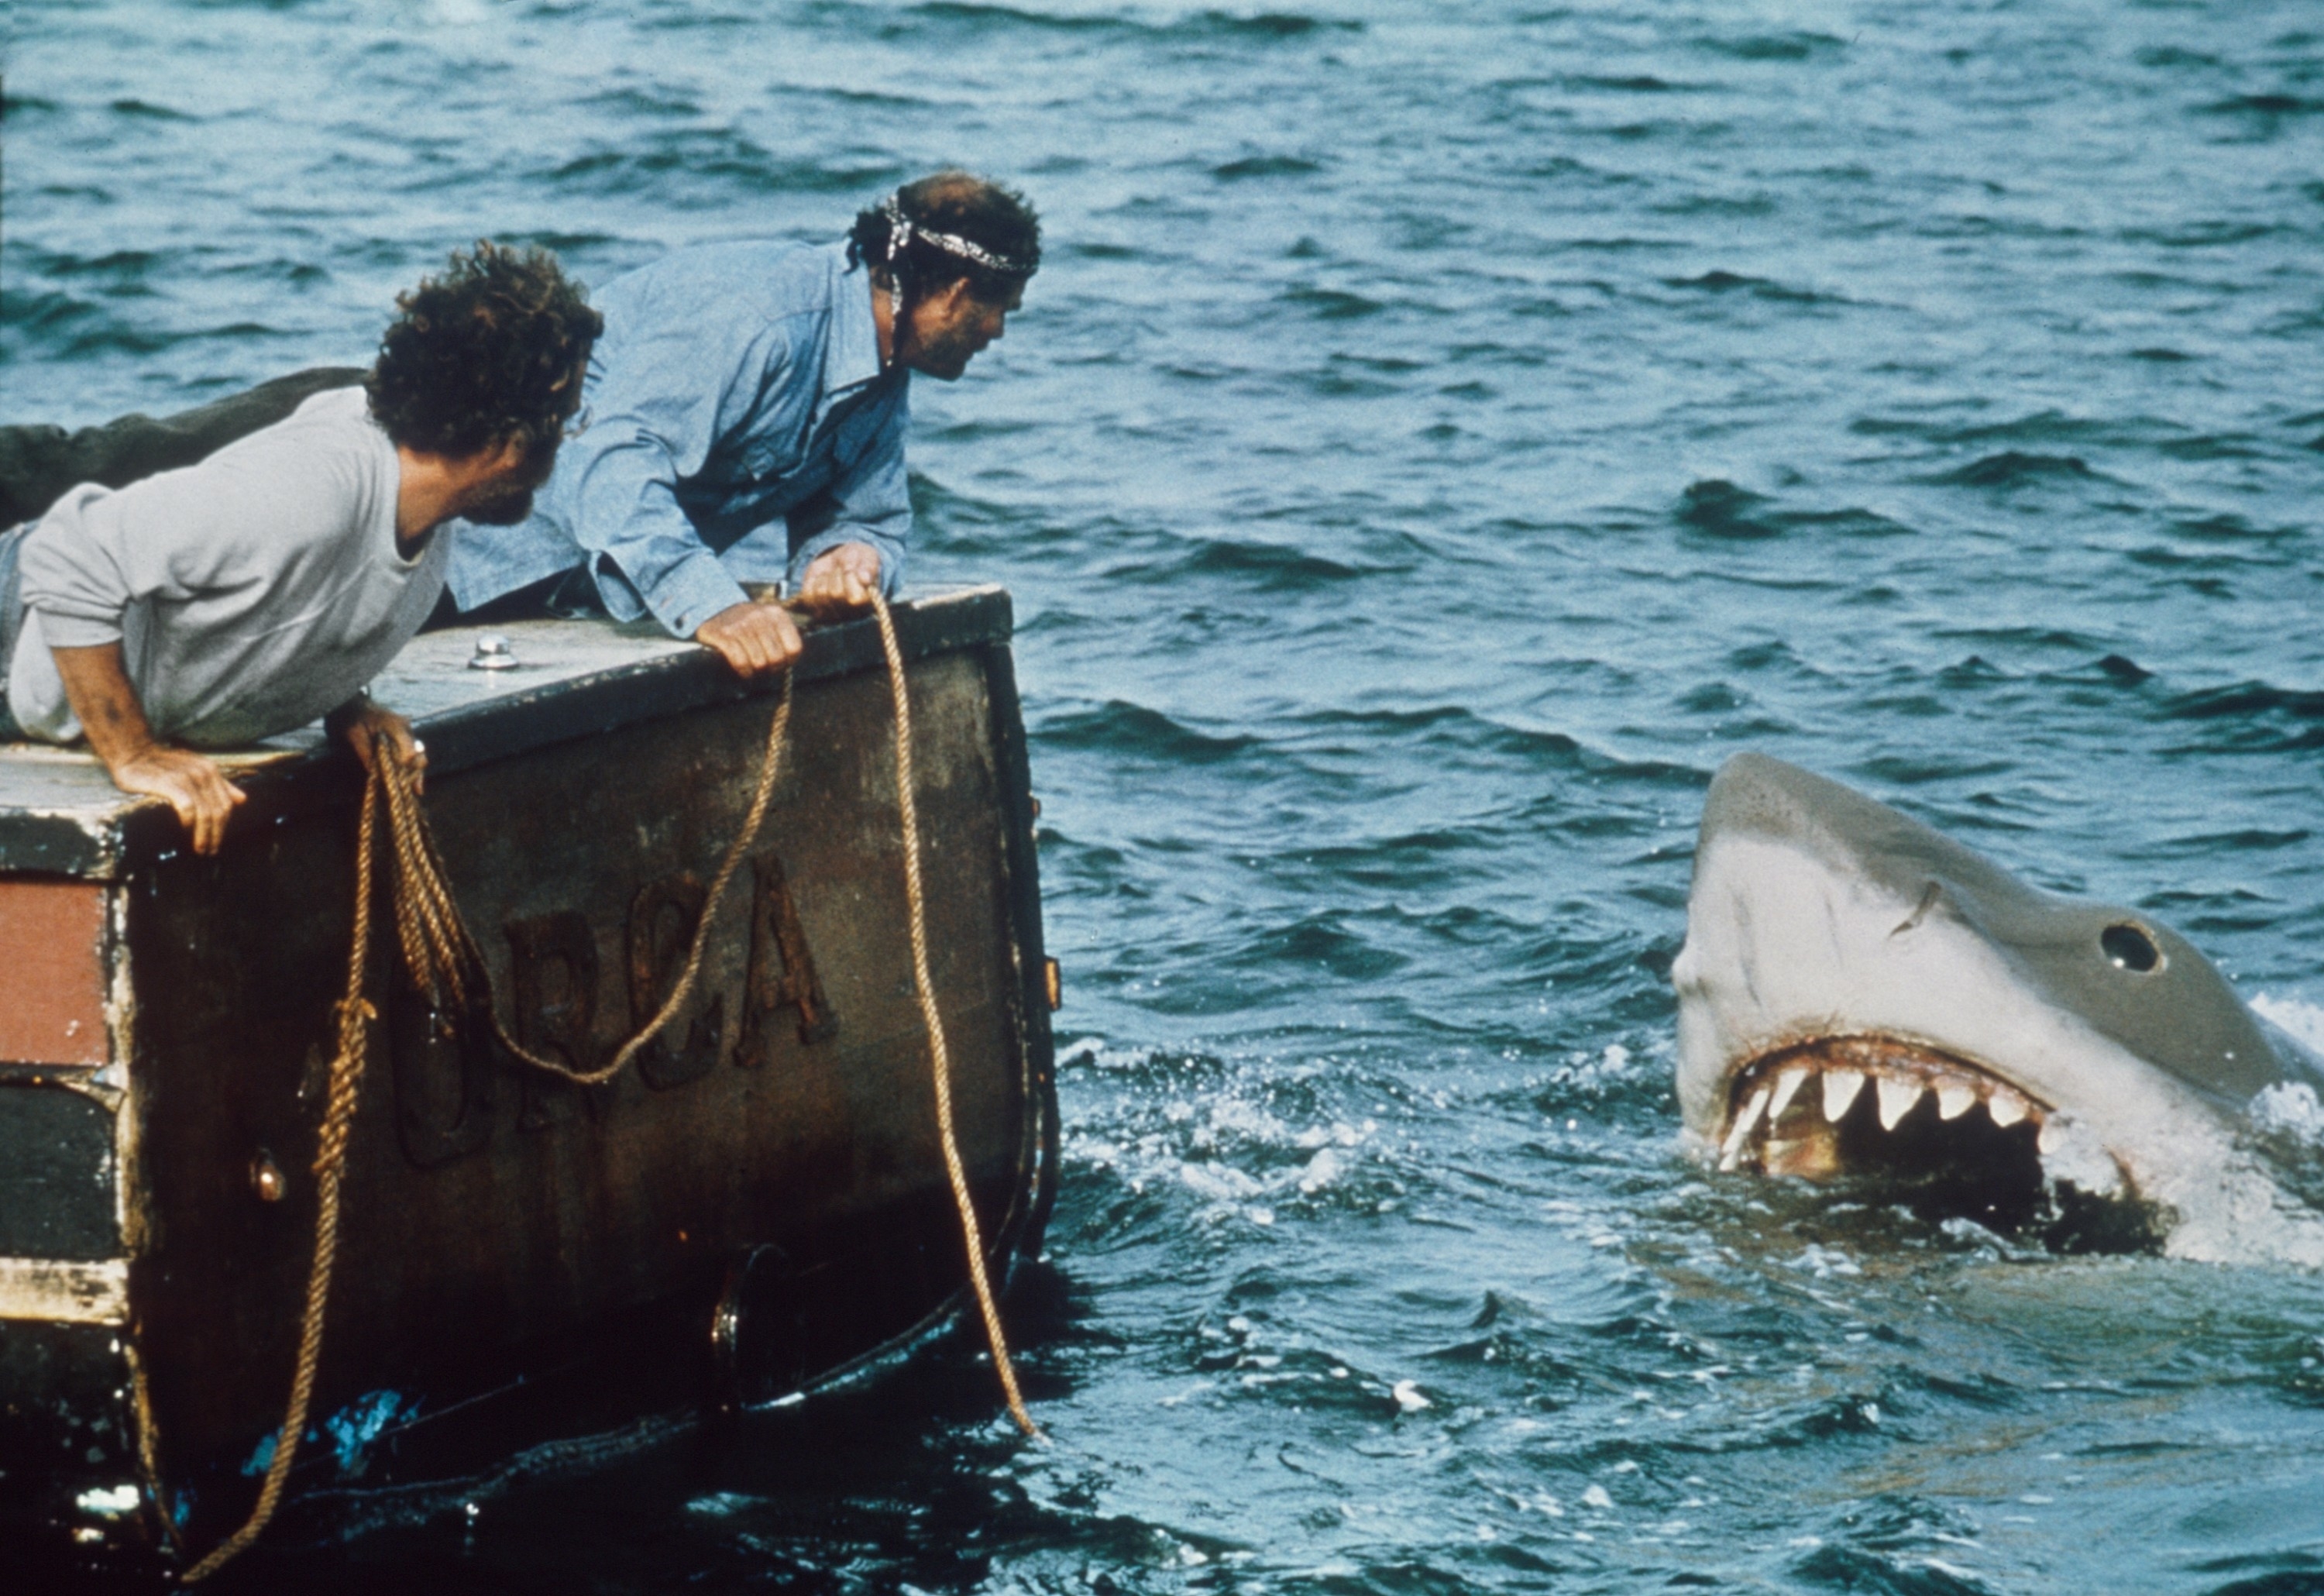 Two characters from the movie Jaws are on a boat, looking apprehensively at a large mechanical shark emerging from the water